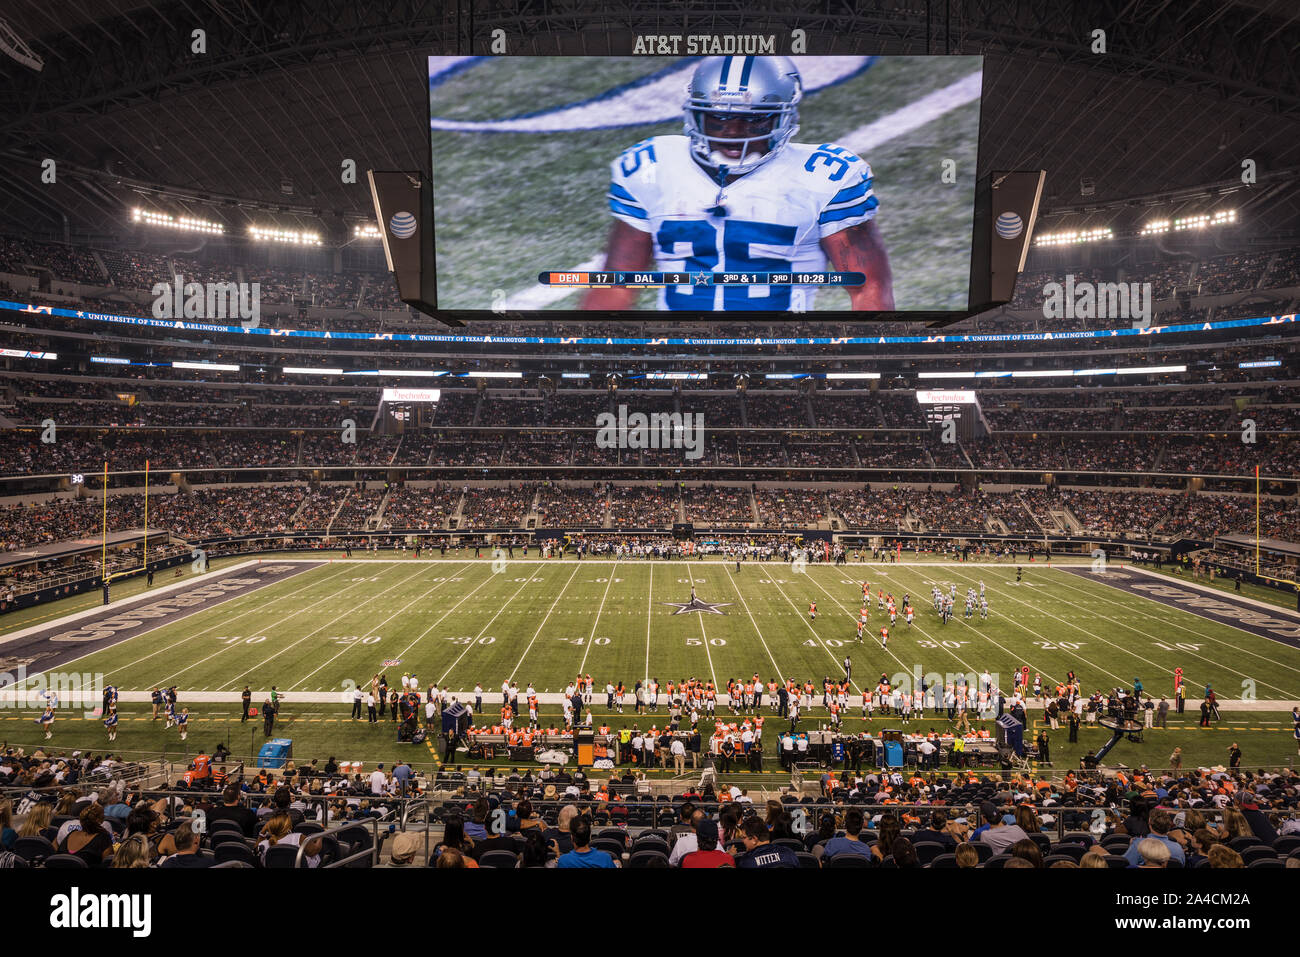 The enormous, high-definition video screen stretching from one 20-yard line to the other and weighing 1.2 million pounds, at the Cowboys' home field AT&T Stadium in Arlington, Texas, is so hard to miss that team employees say many fans watch the whole game on it, rather than by watching the live action on the field below Stock Photo